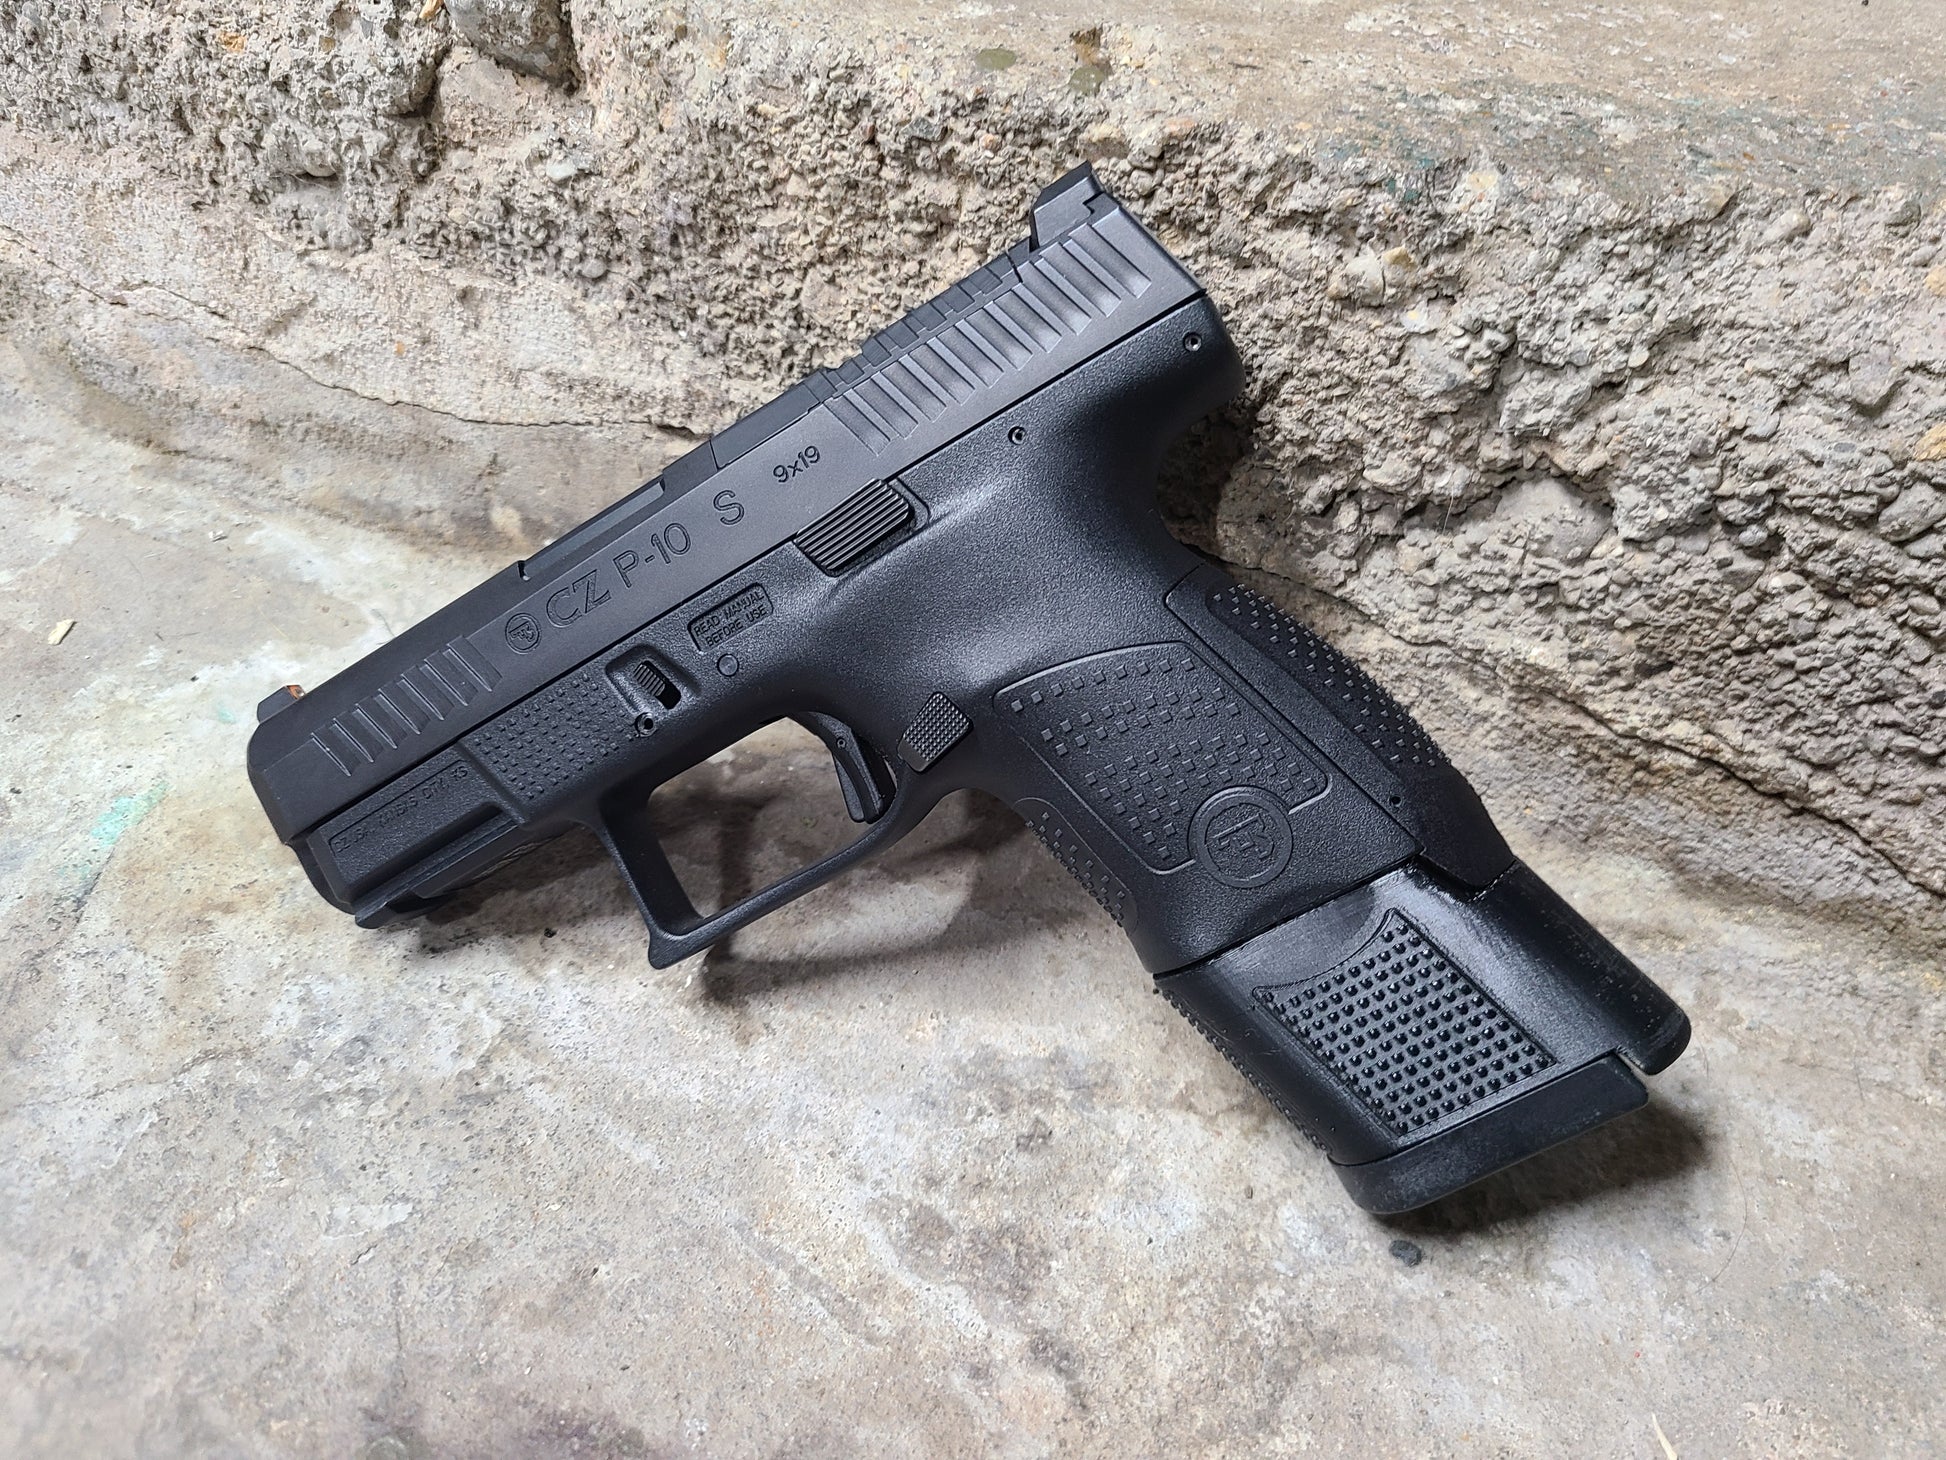 CZ P10s Magazine Sleeve. Used to adapt the CZ P10F 19 round magazines to the subcompact frame.